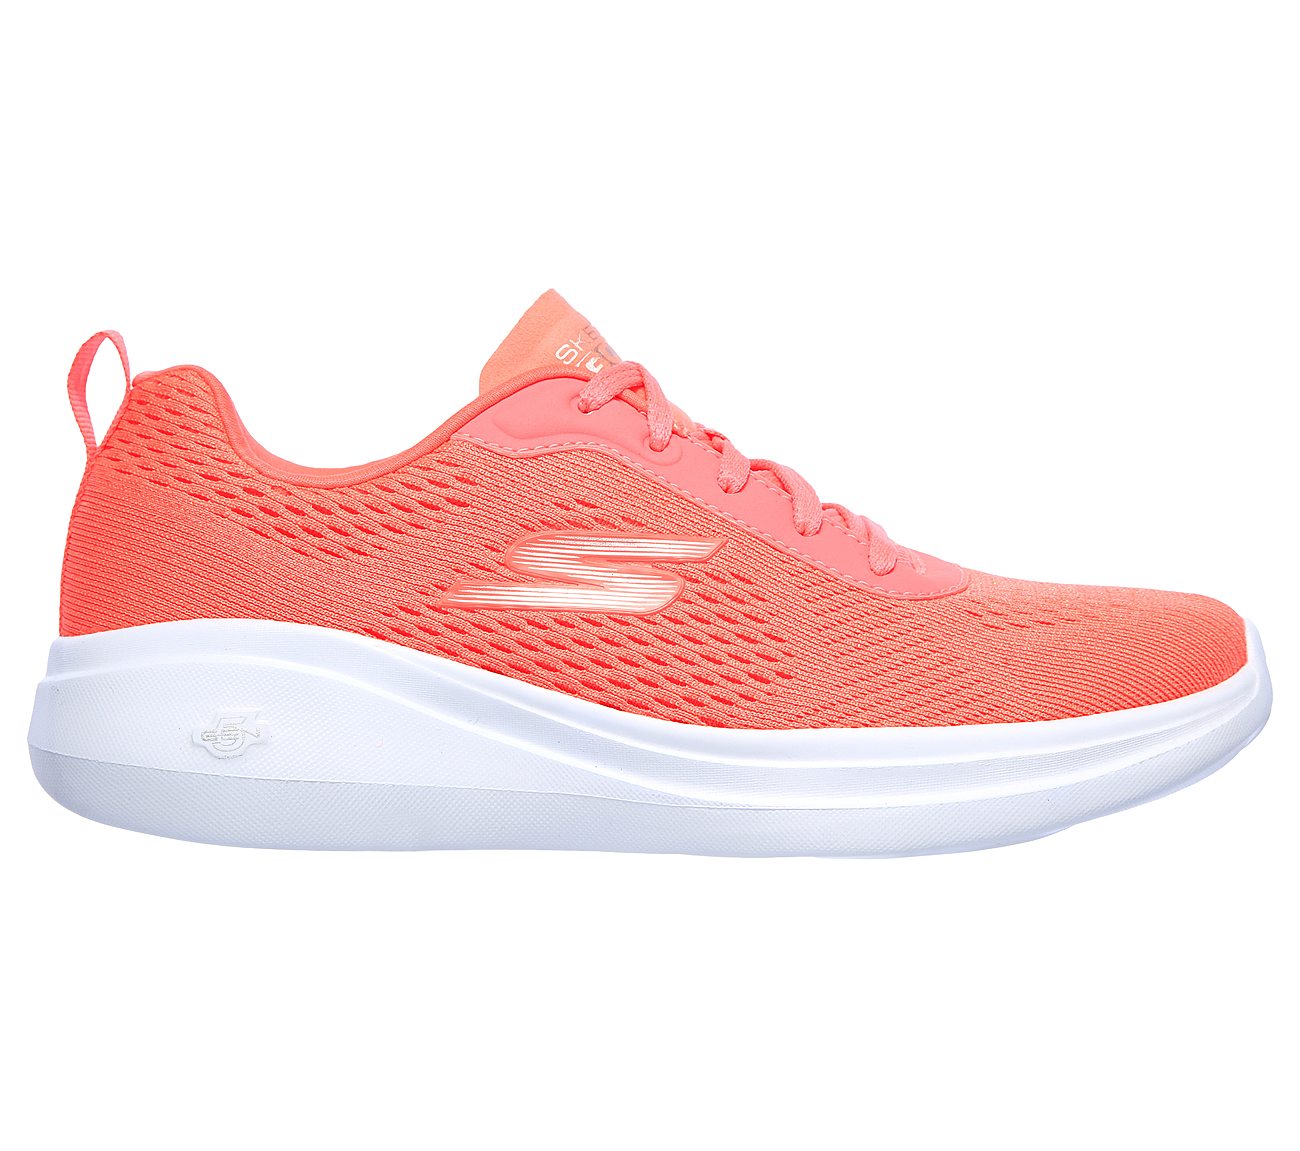 GO RUN FAST-FLOAT, HOT PINK Footwear Right View